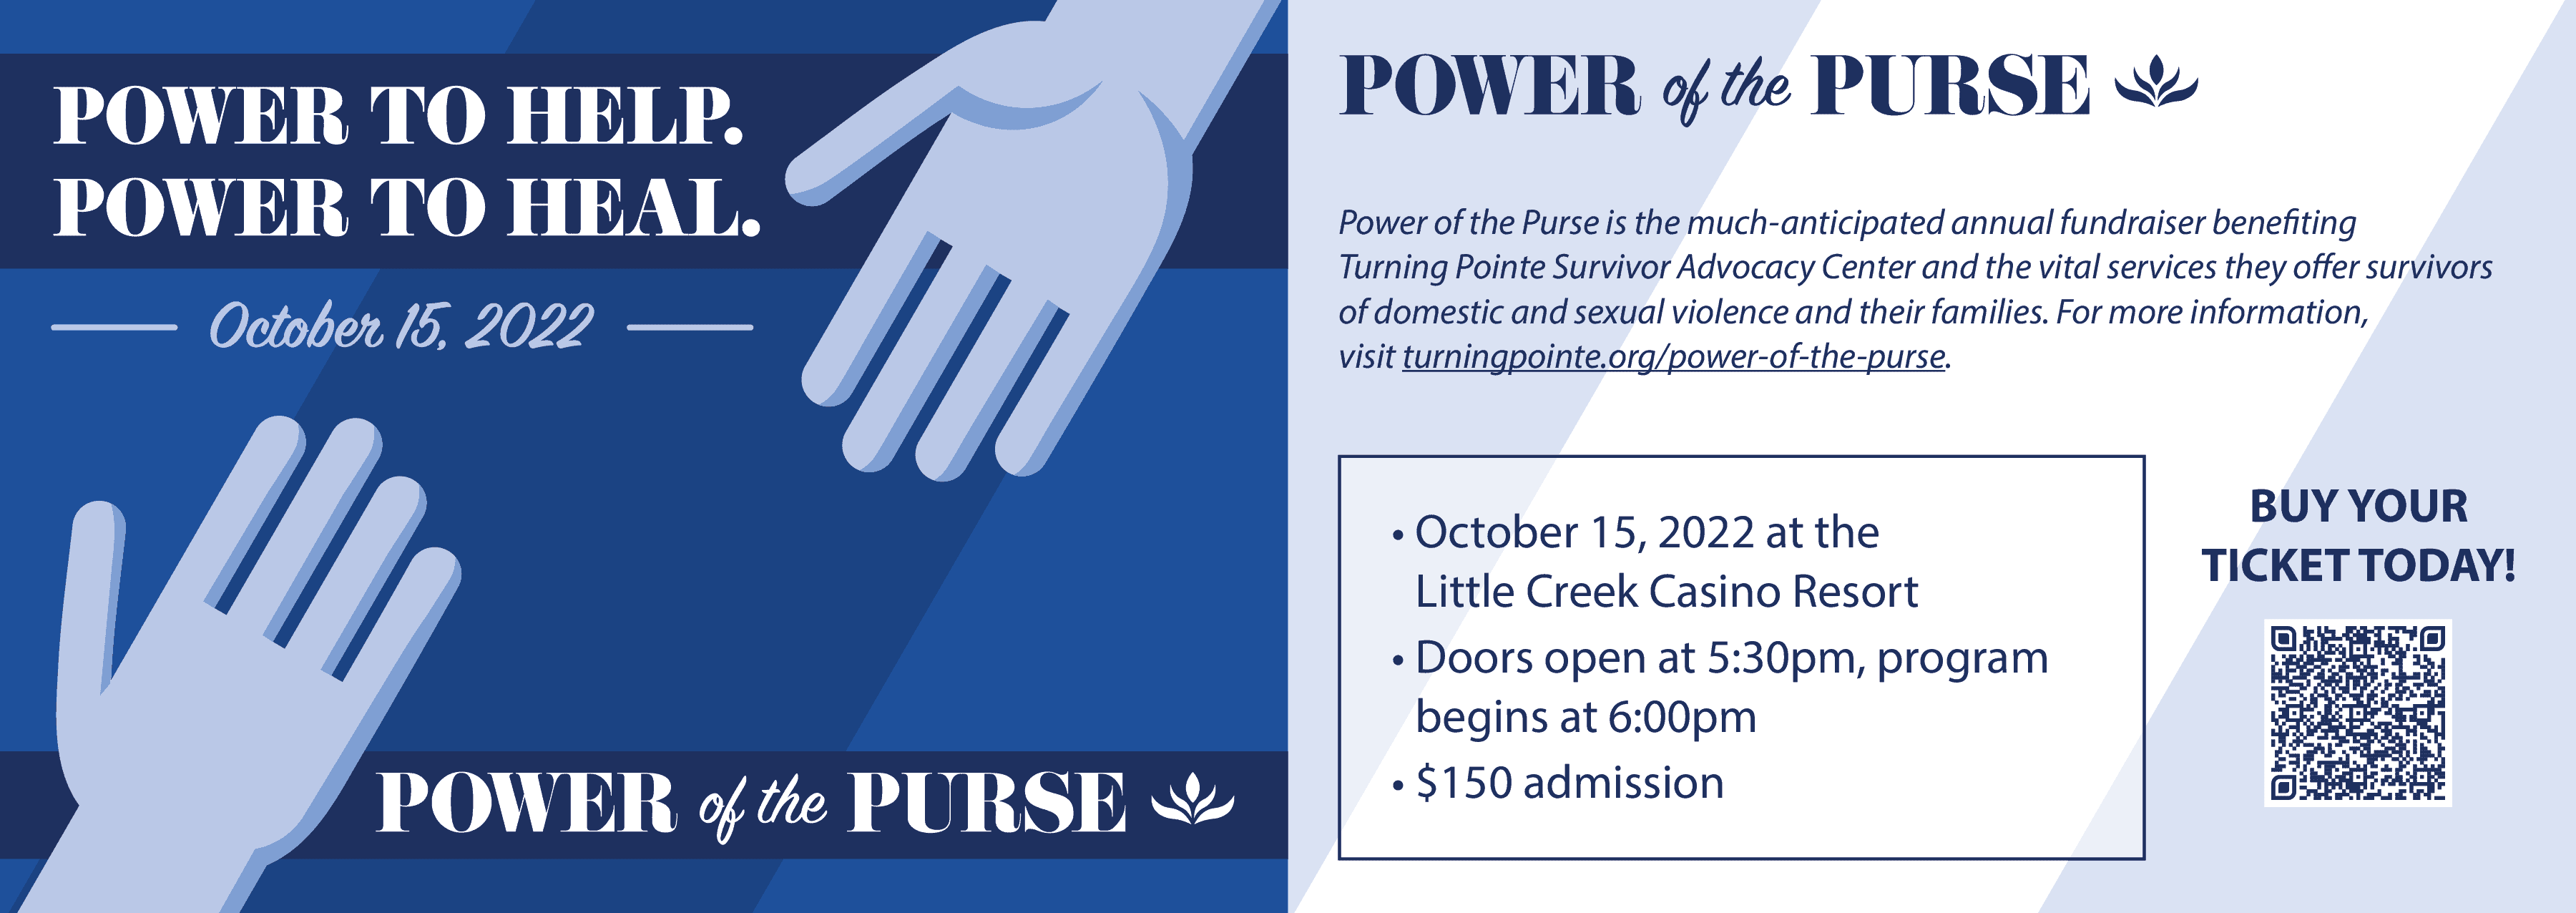 Power of the Purse information